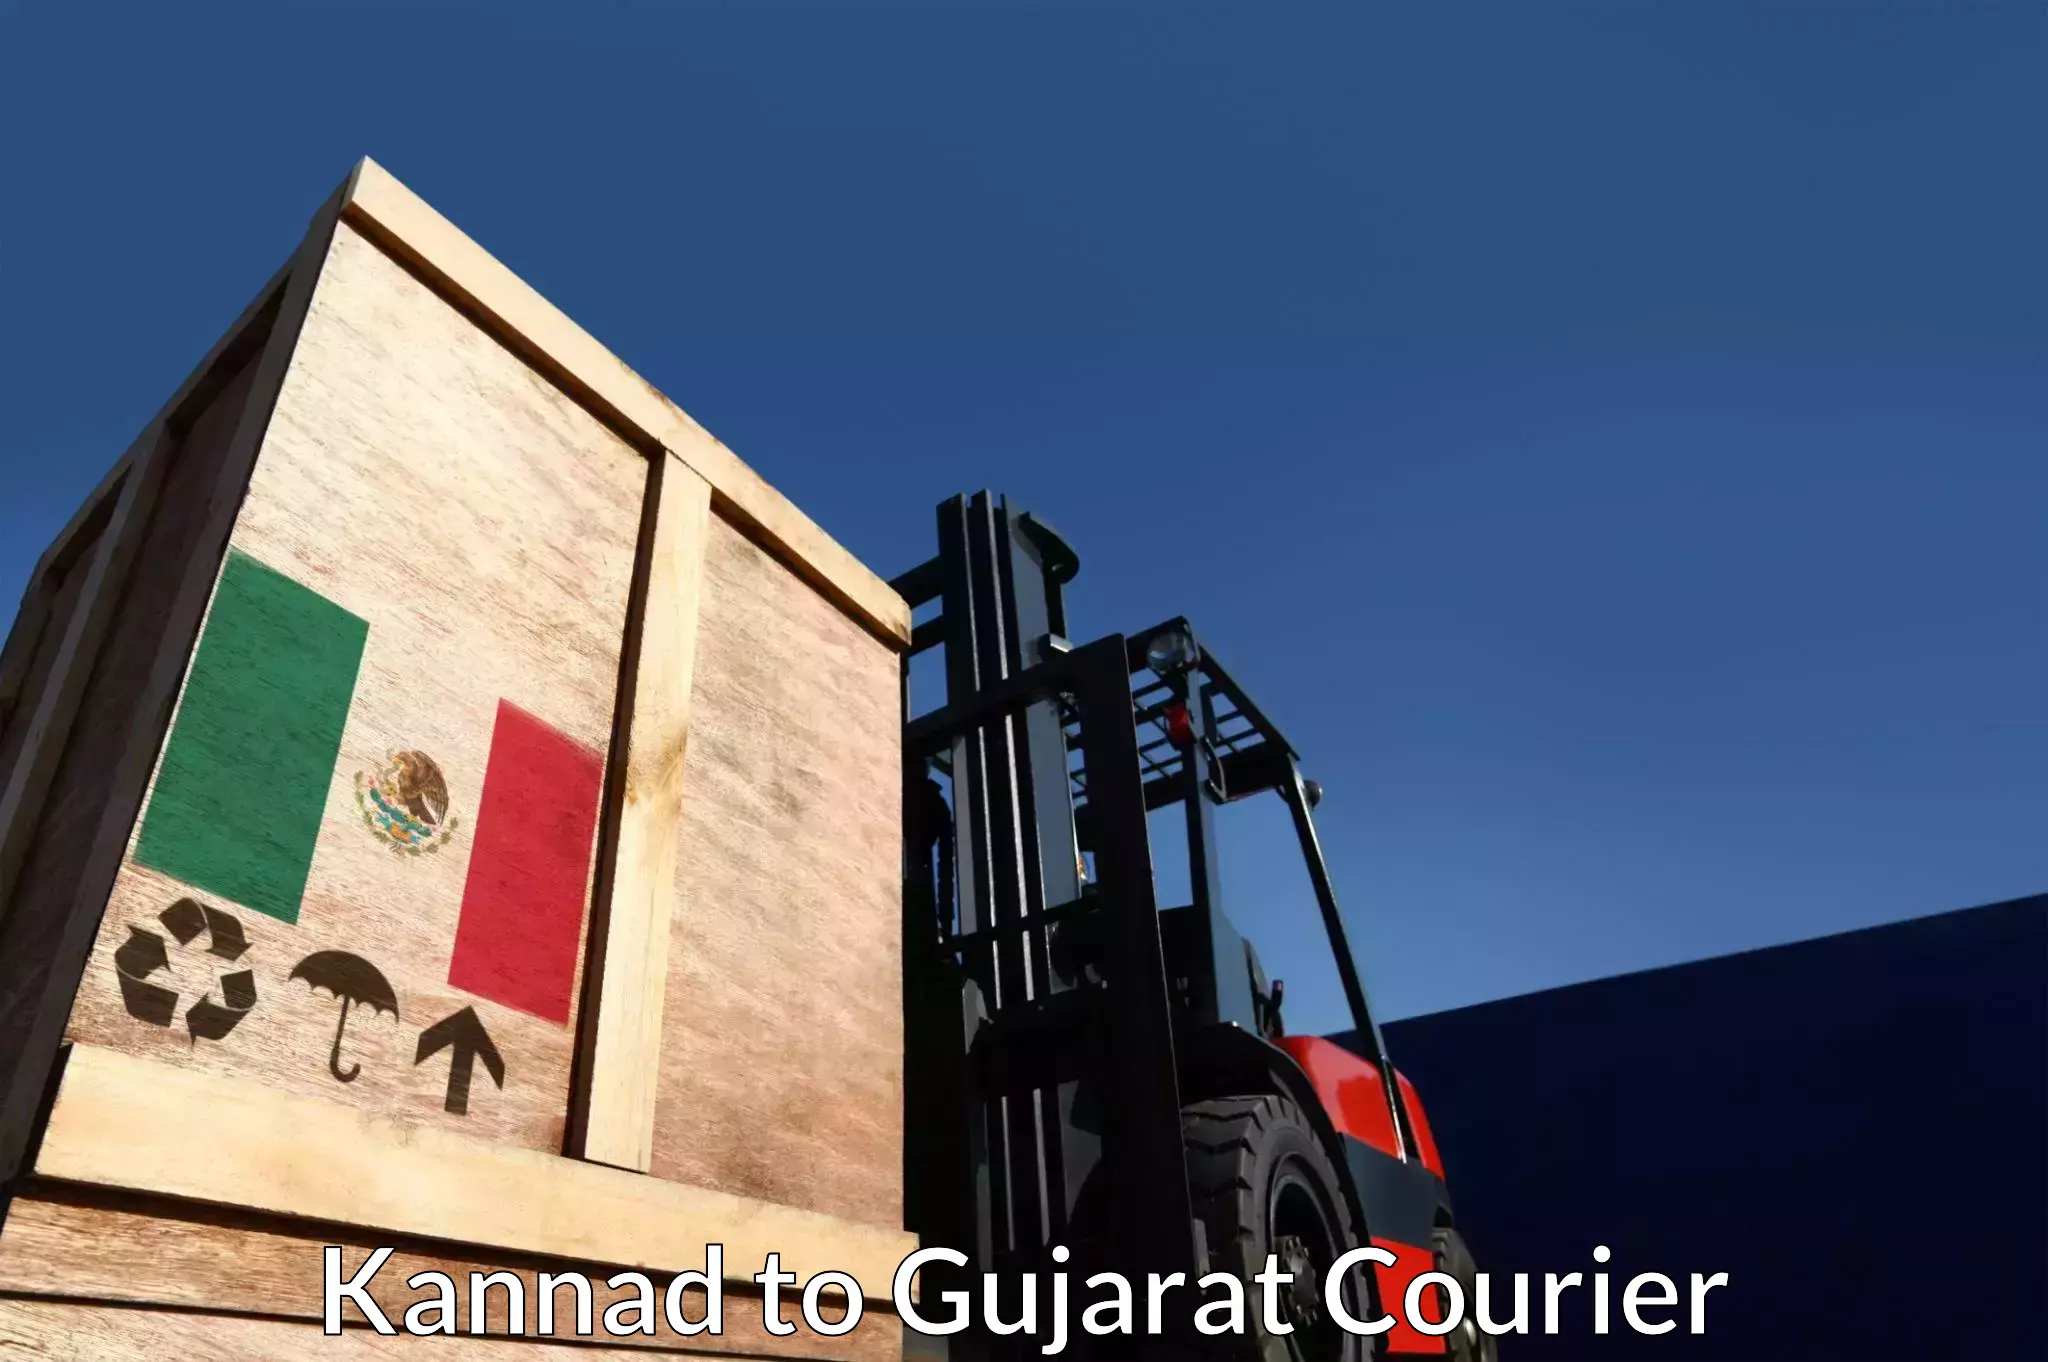 Next-day delivery options Kannad to Ahmedabad